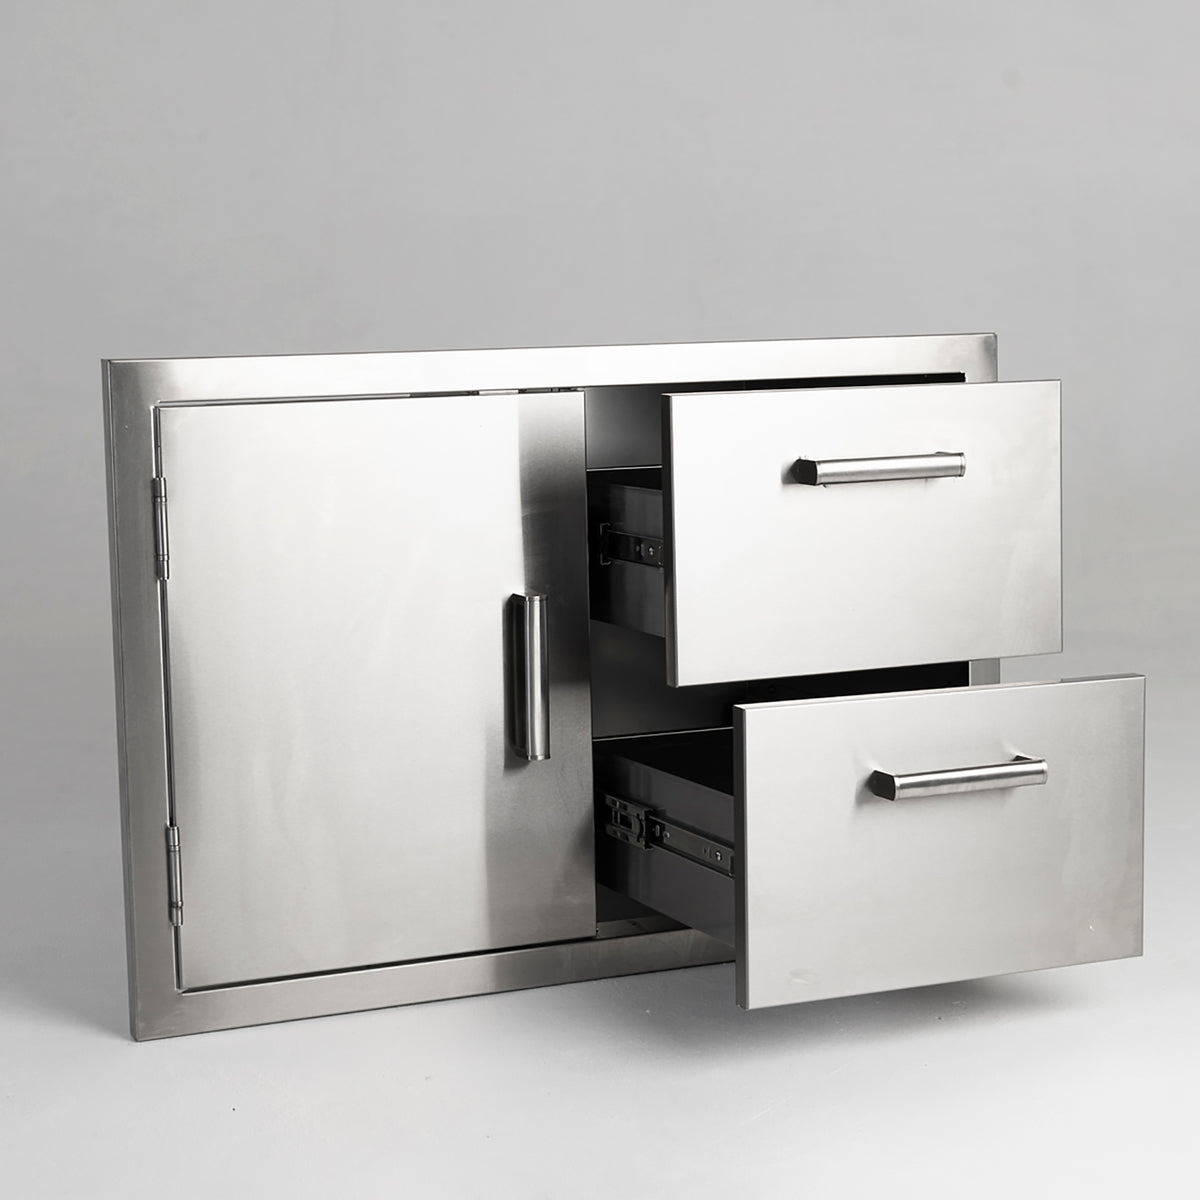 Draco Grills Stainless Steel Build-in Outdoor Kitchen Dual Drawer and Single Door Unit